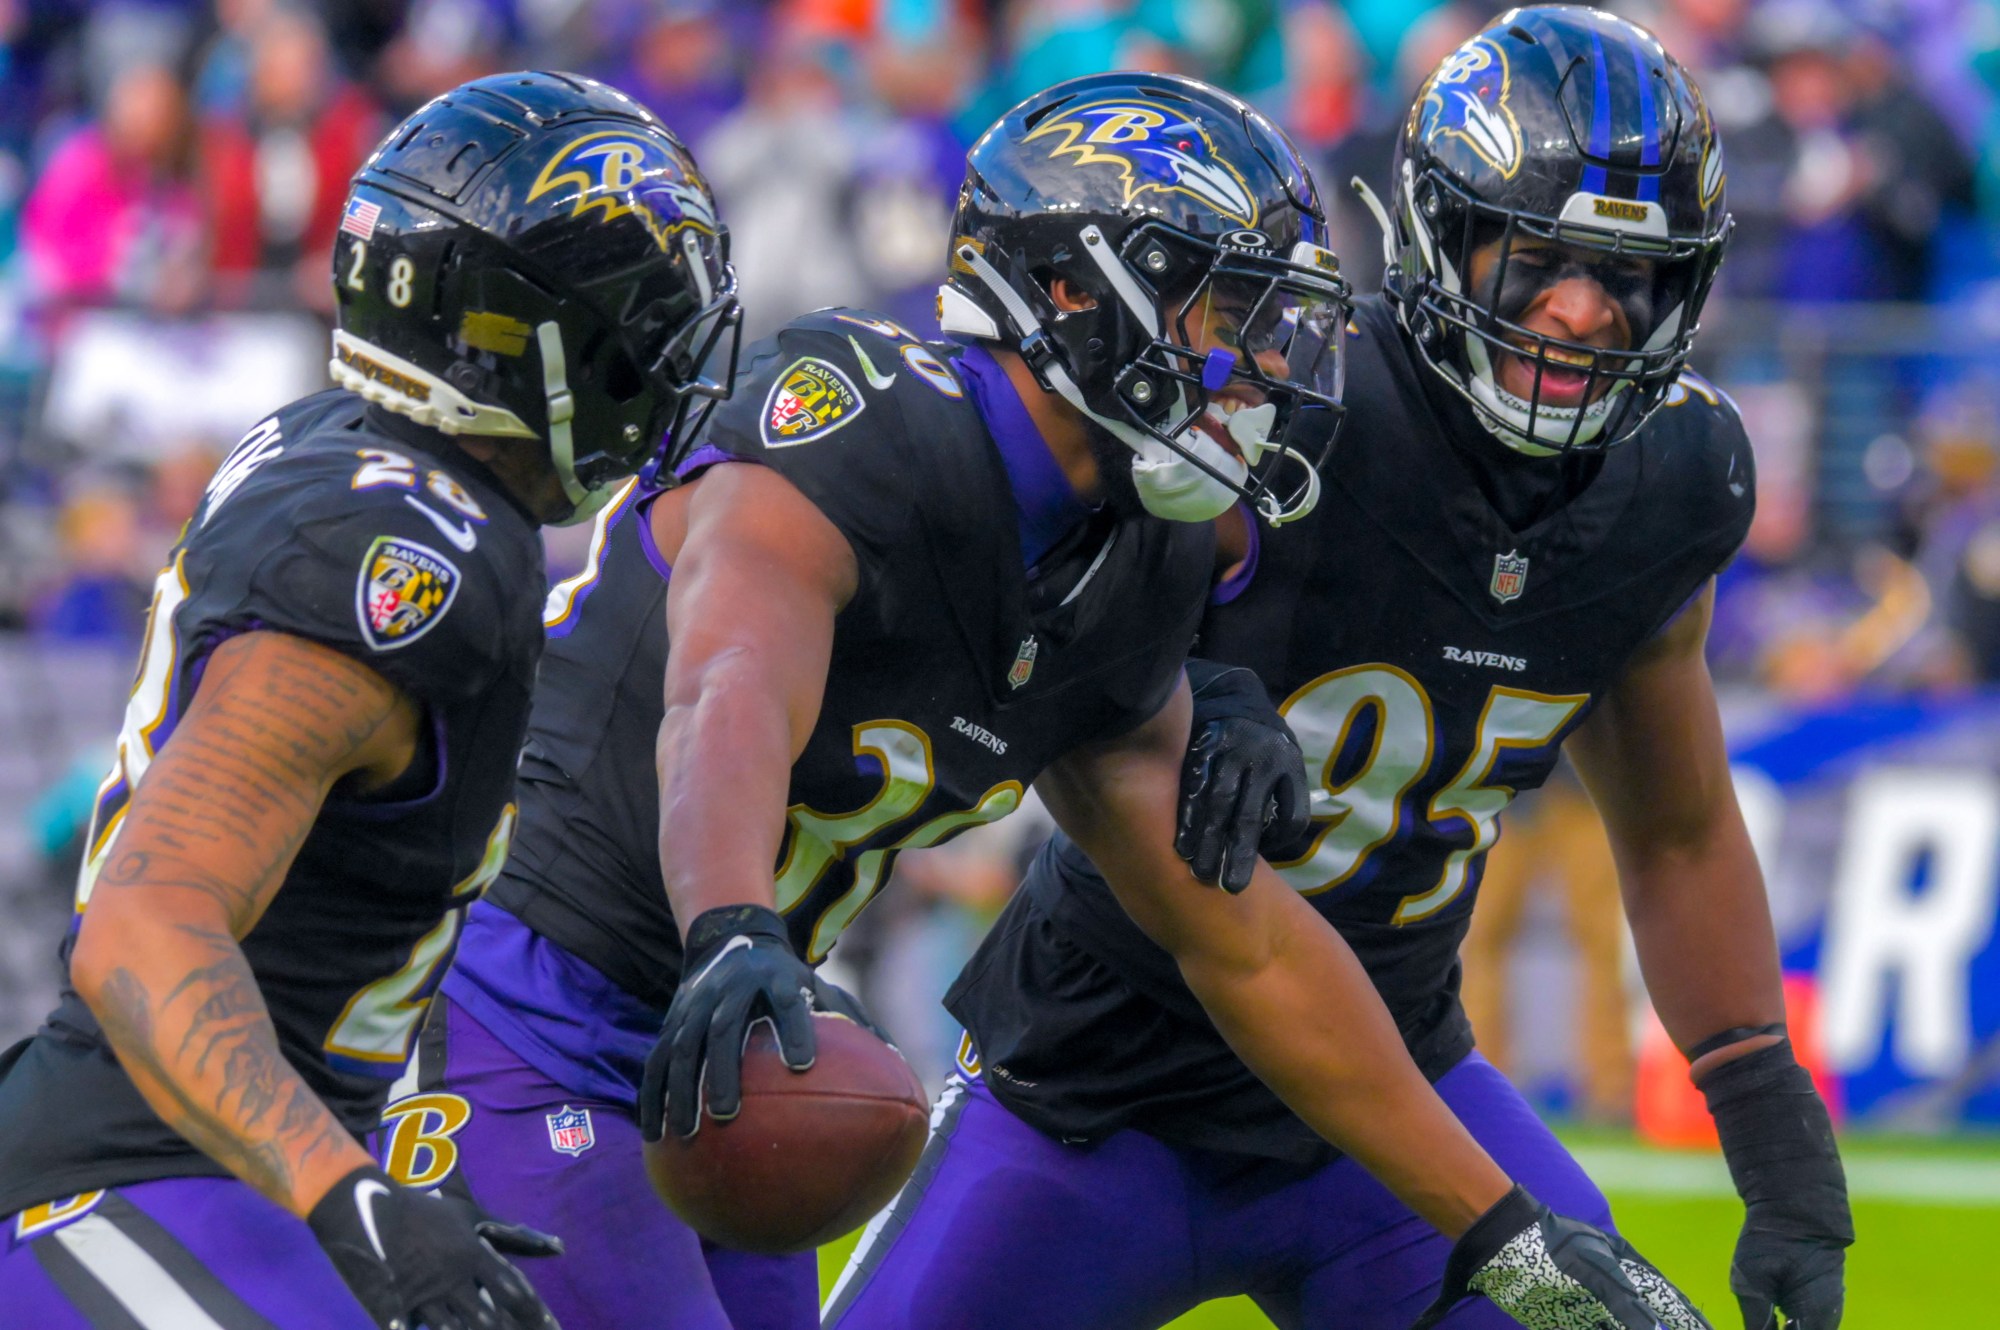 Baltimore Ravens inside linebacker Trenton Simpson (30) holds the football, celebrating his interception of a Miami Dolphins quarterback Tua Tagovailoa pass with cornerback Ronald Darby (28) and outside linebacker Tavius Robinson (95) during the fourth quarter of an AFC matchup of NFL football in Baltimore. The Ravens became the AFC North champions, securing home field advantage throughout the playoffs with their 56-19 drubbing of Miami. (Karl Merton Ferron/Baltimore Sun Staff)